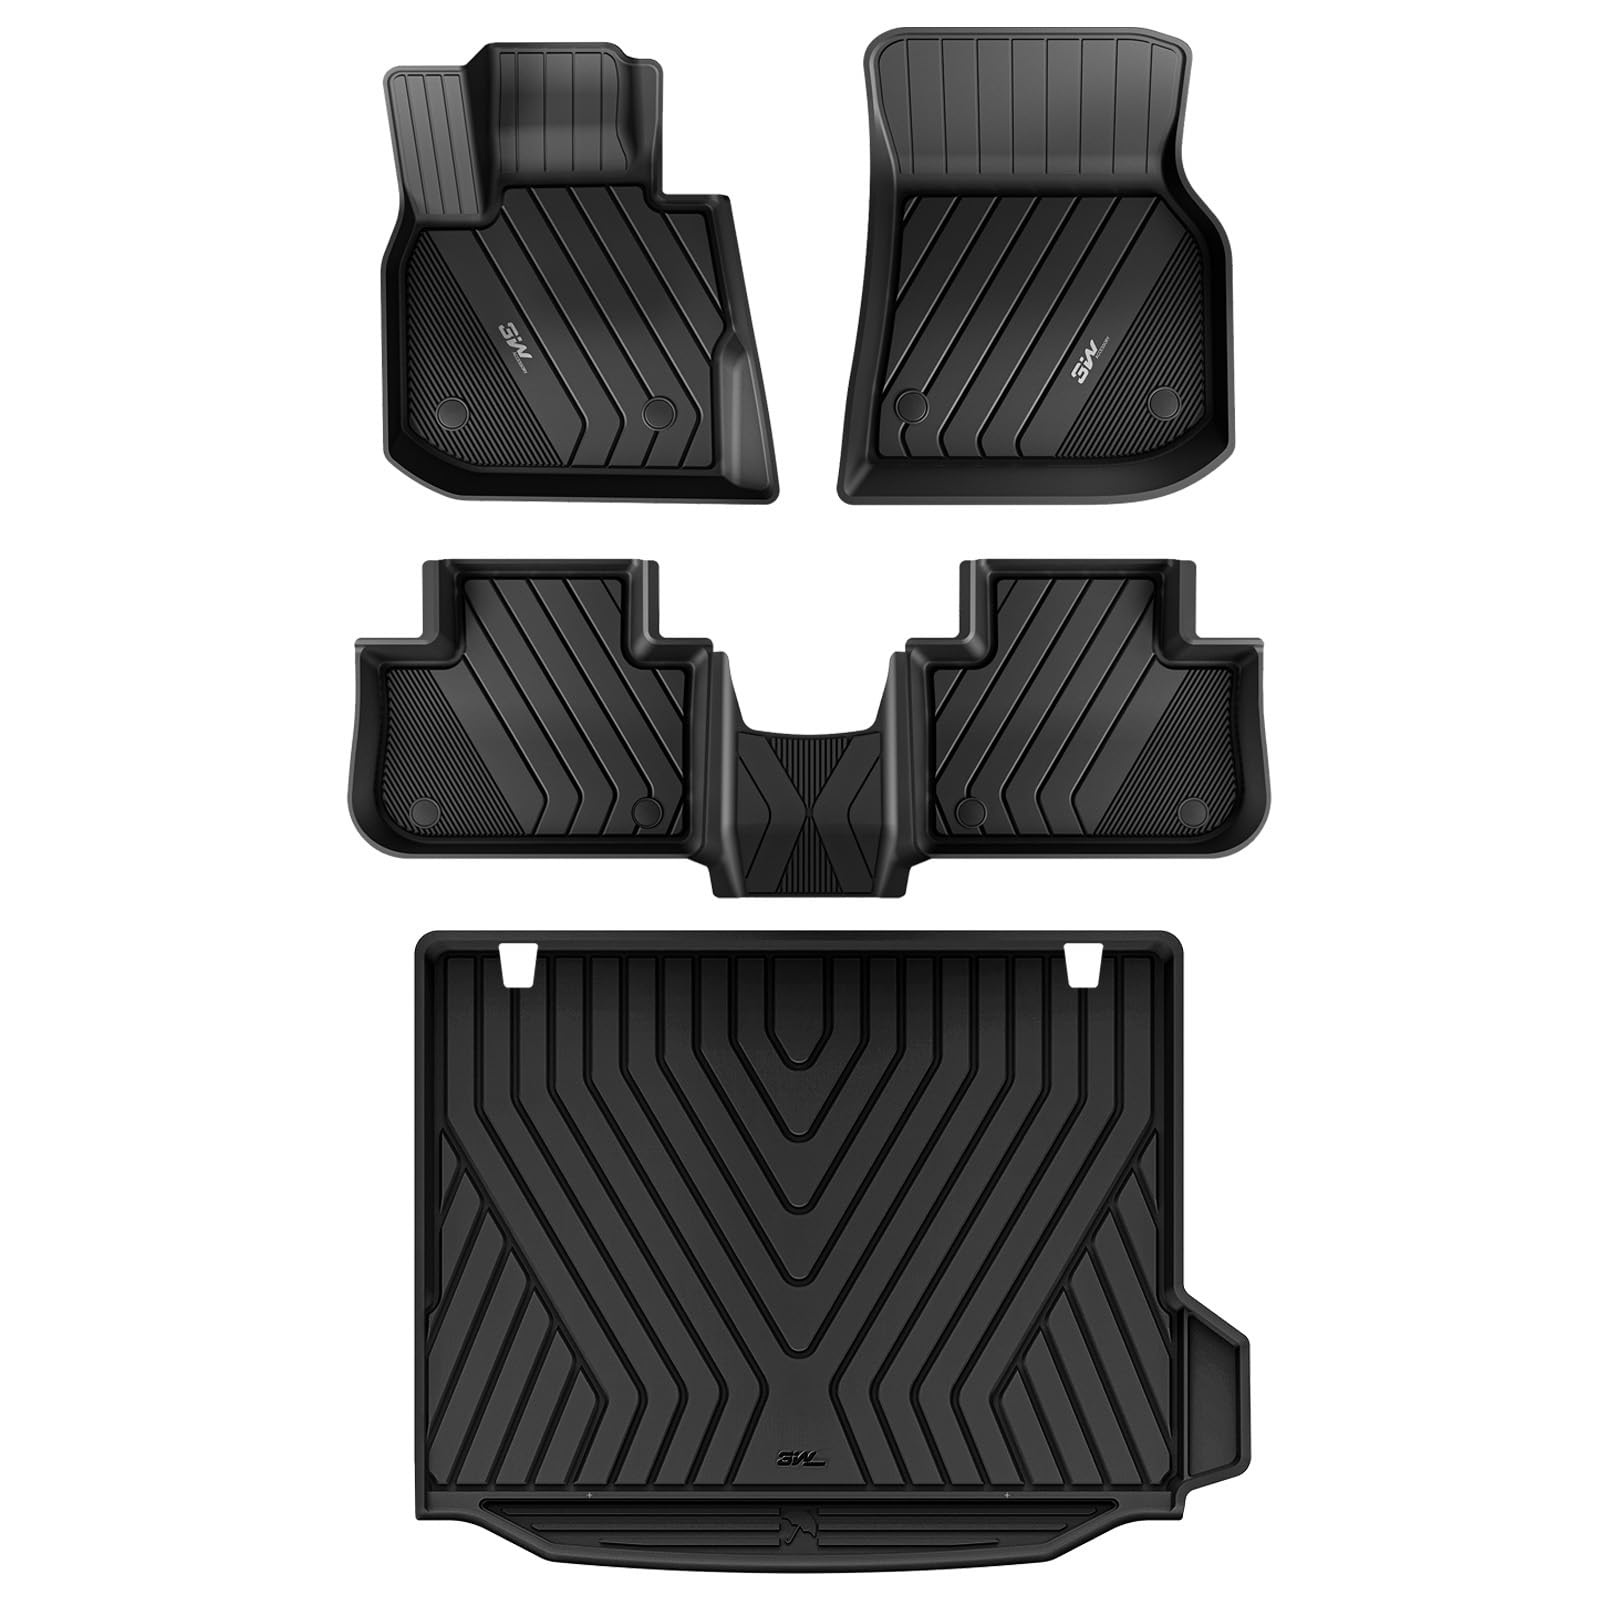 3W BMW 2019-2024 X4 M M40i xDrive30i Floor Mats & Cargo Mats TPE Material & All-Weather Protection Vehicles & Parts 3Wliners 2019-2024 X4 2019-2024 1st&2nd Row+Trunk Mat